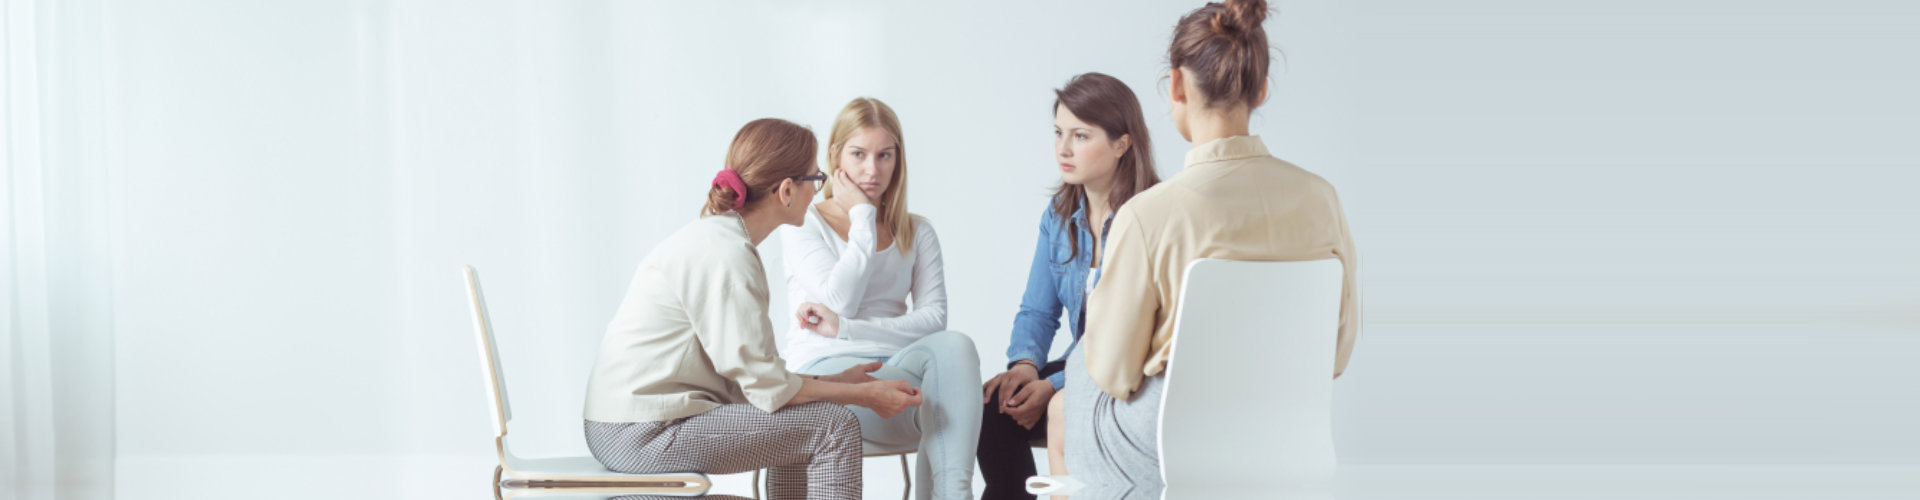 women sitting in circle during session with psychologist